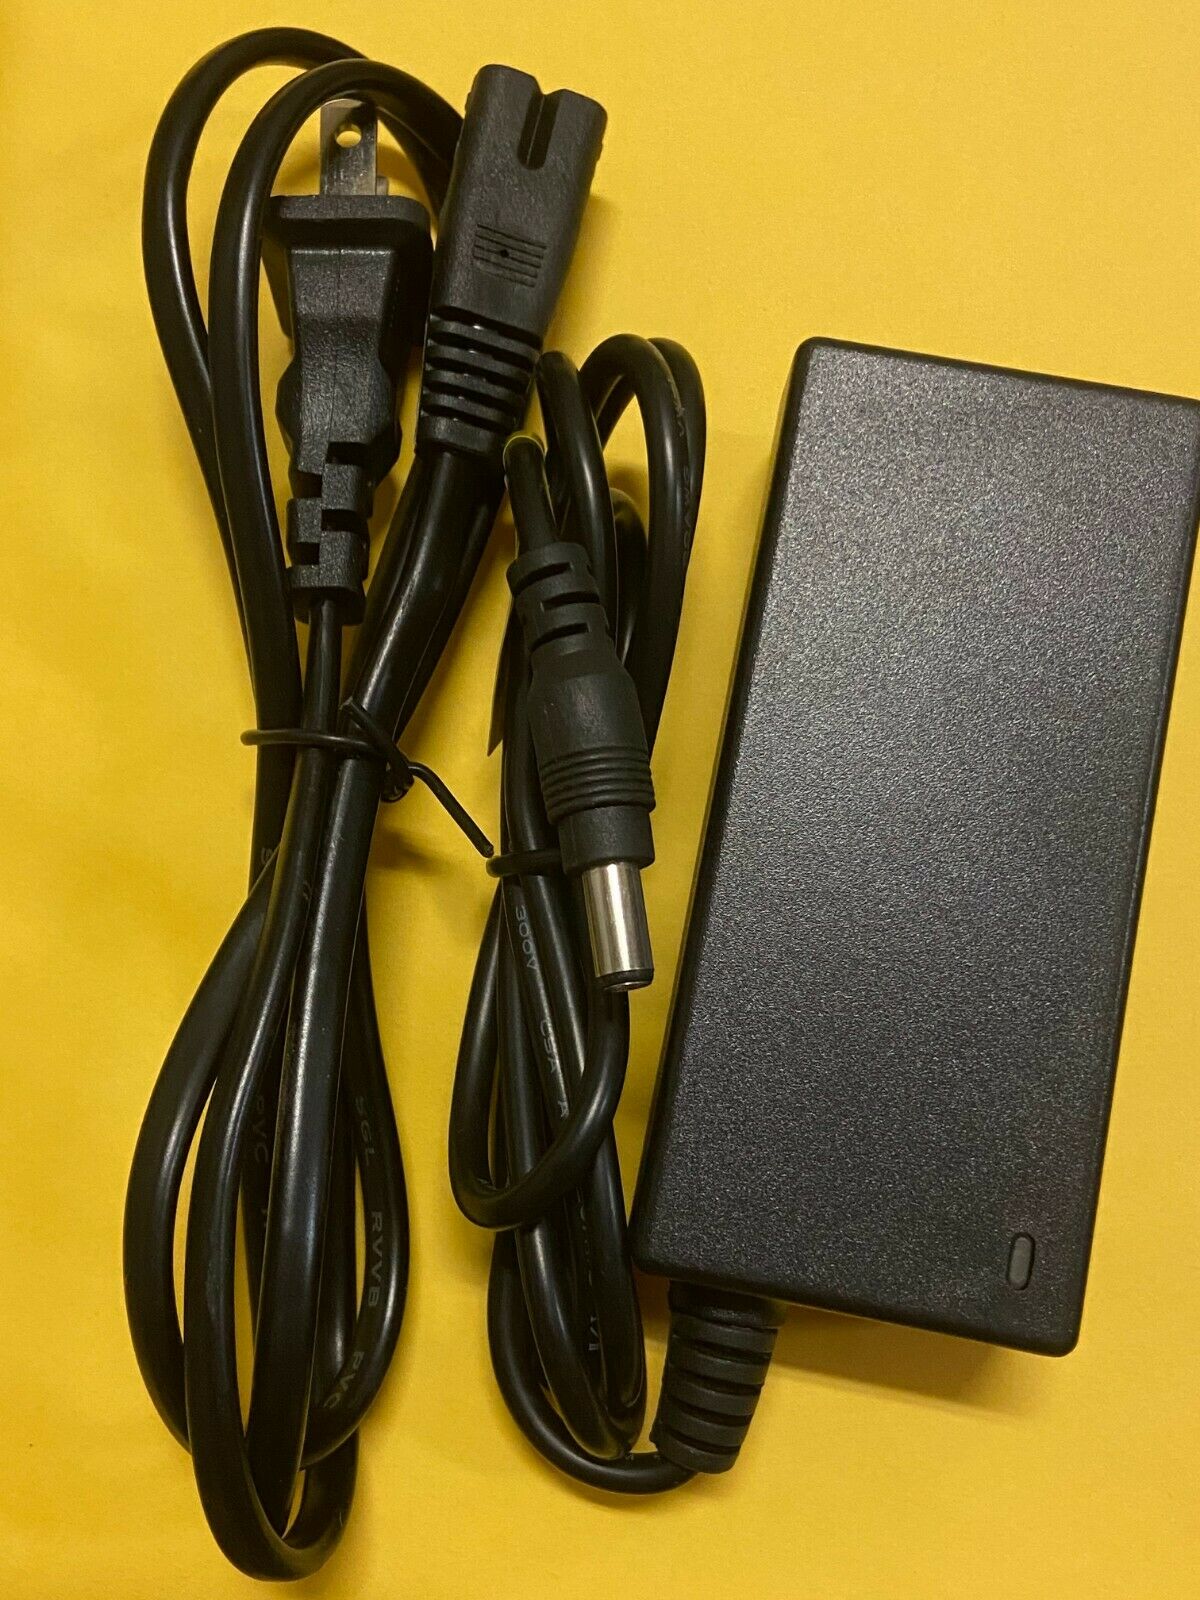 Genuine Power Supply AC Adapter Charger For QNAP TS-269 Pro Color: Black Type: Power supply Maximum Input Current: